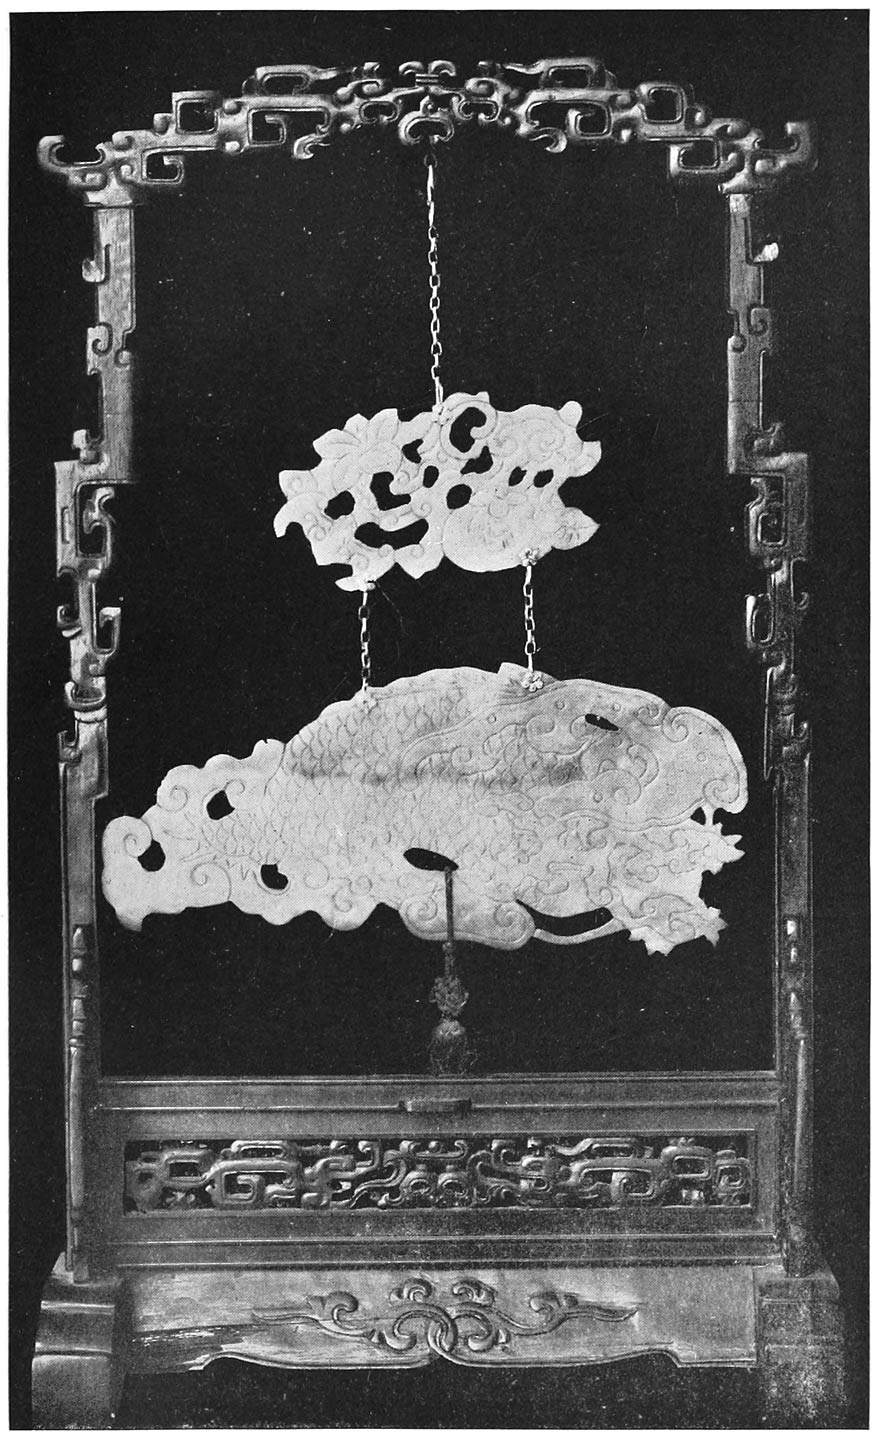 RESONANT STONE OF JADE SHOWING DRAGON WITH CLOUD ORNAMENTS, SUSPENDED FROM CARVED BLACKWOOD FRAME